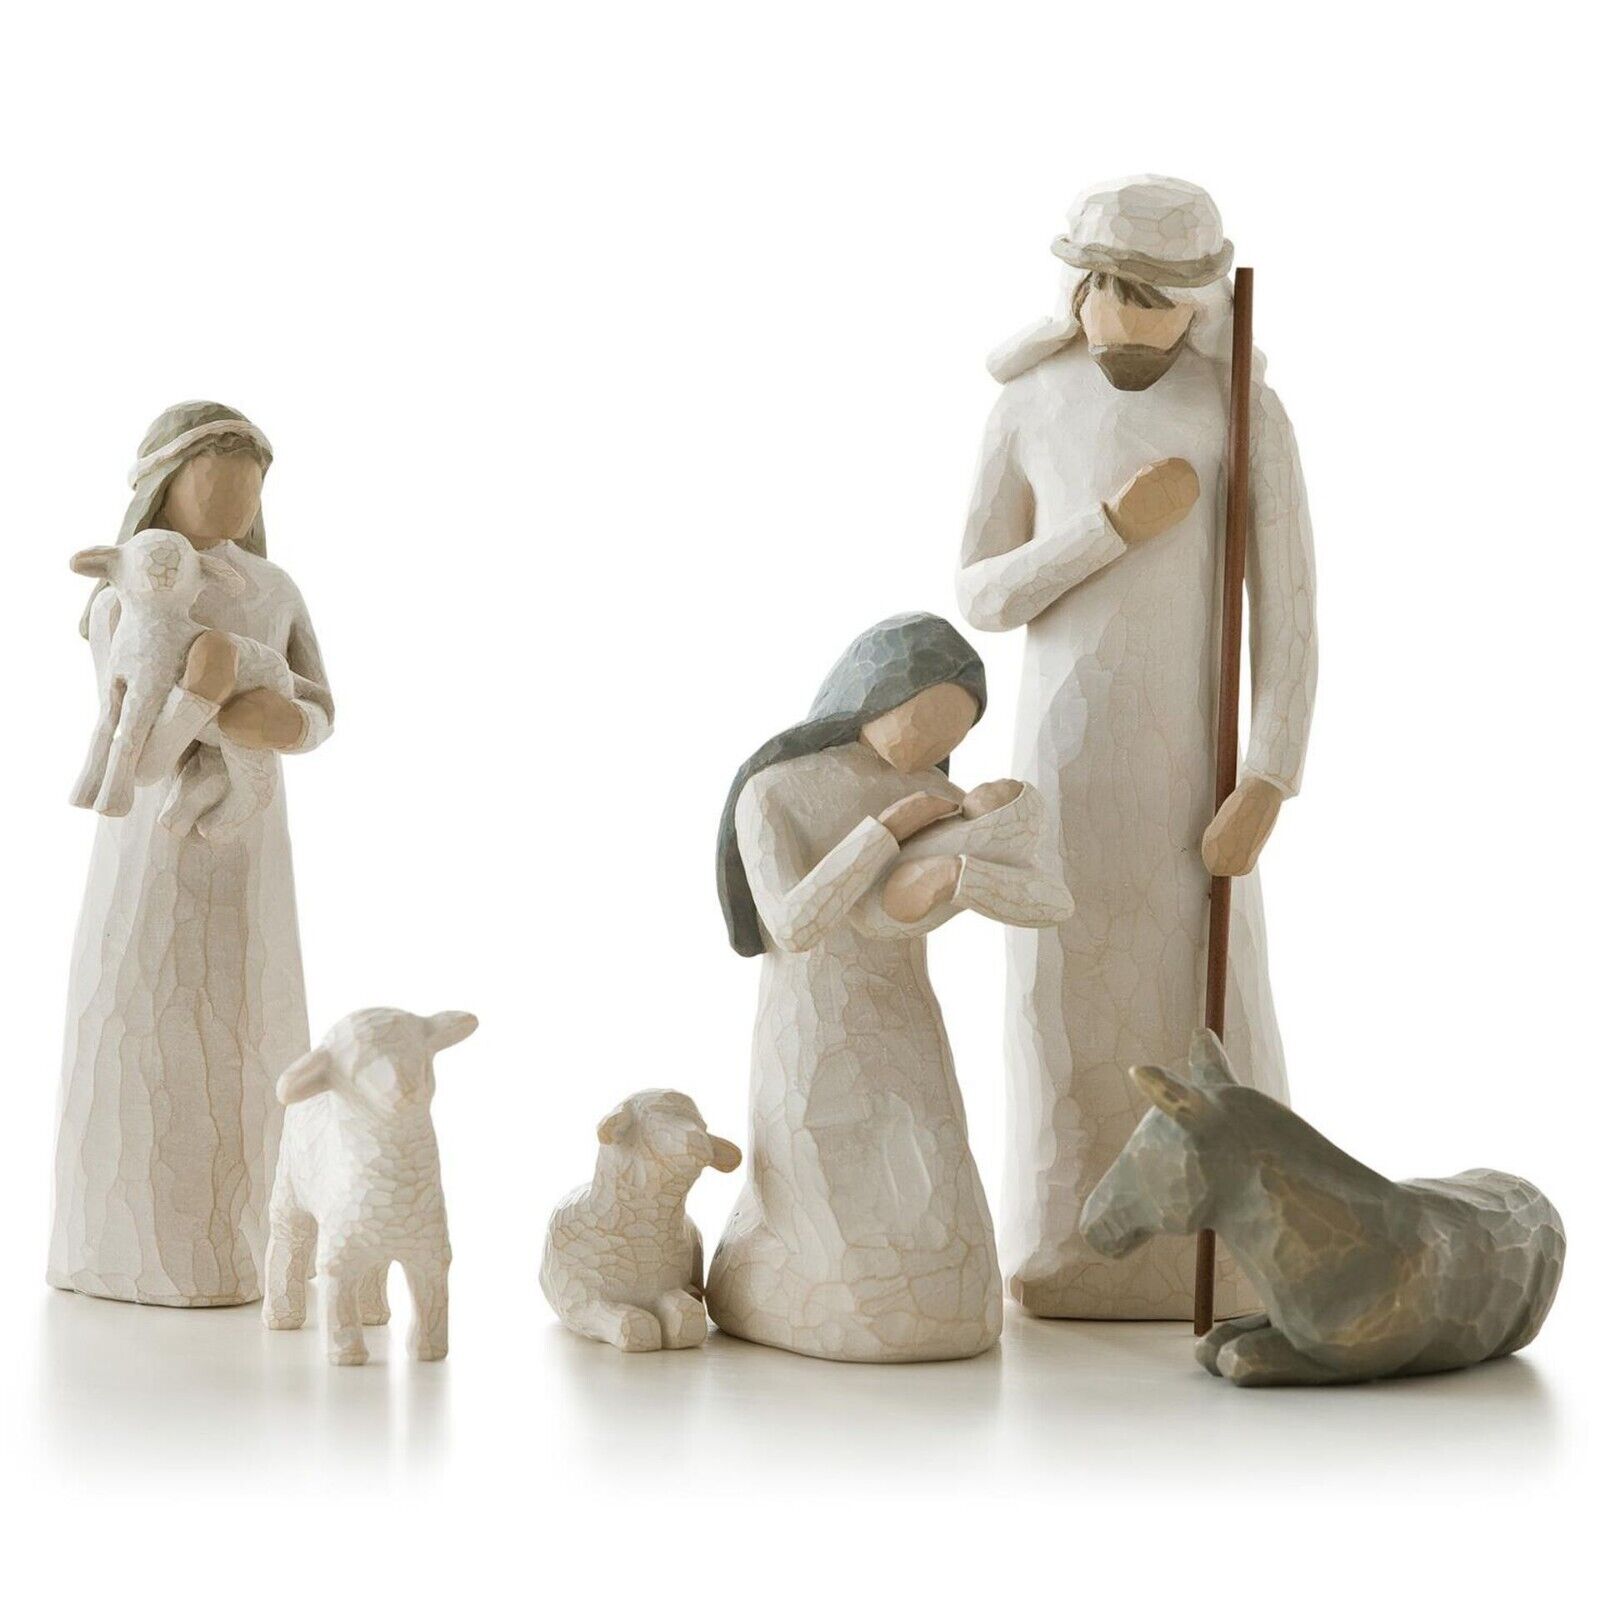 Willow Tree Nativity, Sculpted Hand-Painted Nativity Figures